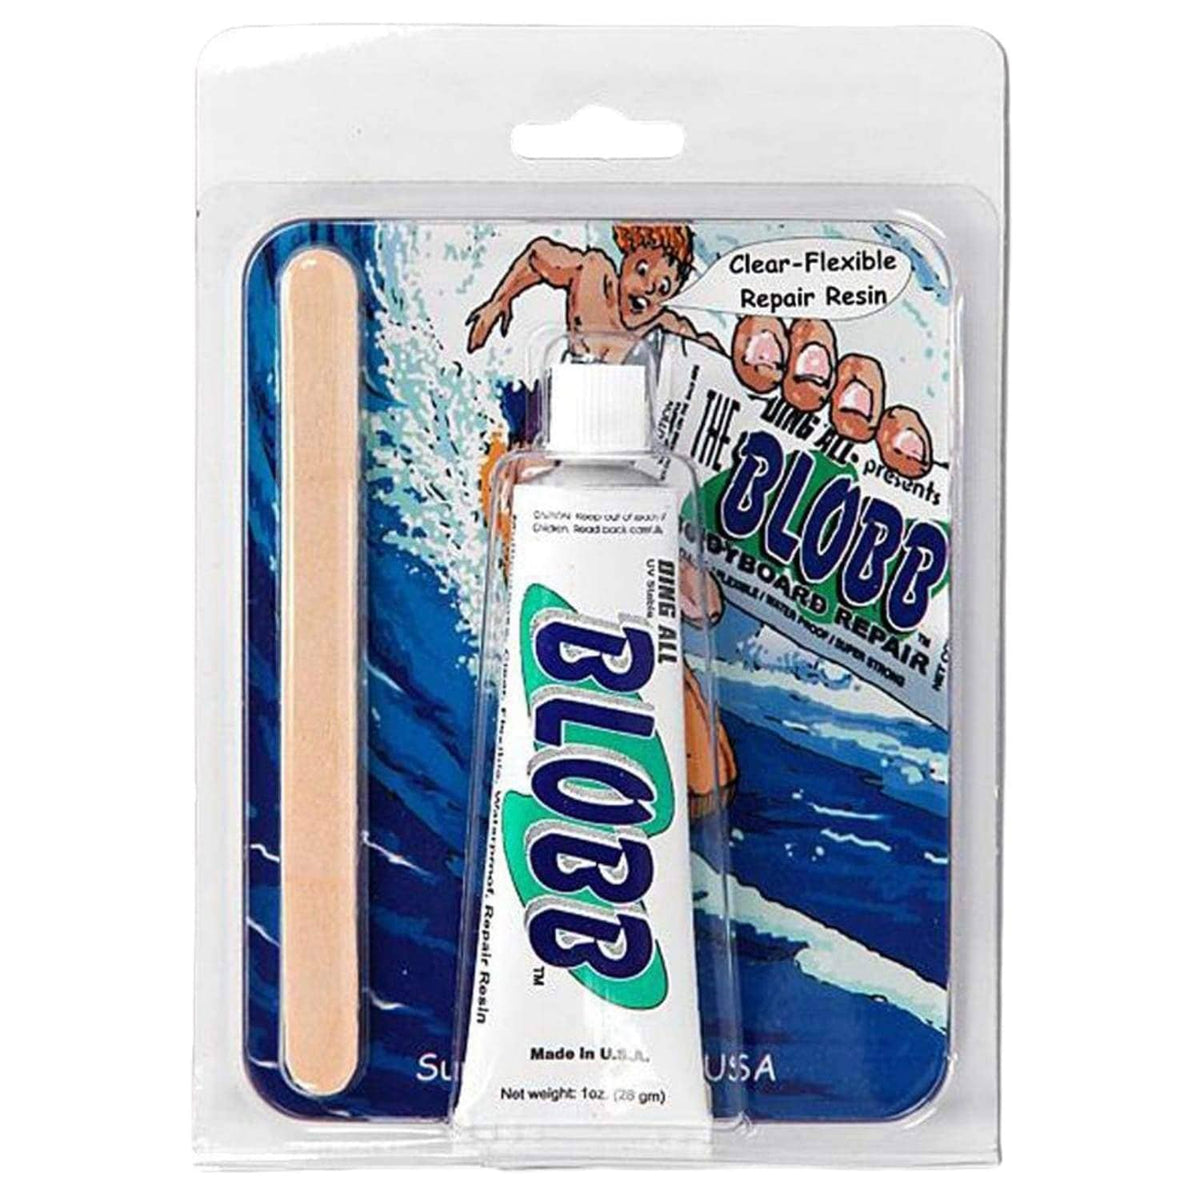 Ding All The Blobb - Wetsuit / Bodyboard / Fin Repair N/A 1oz - Wetsuit Repair Glue by Ding All